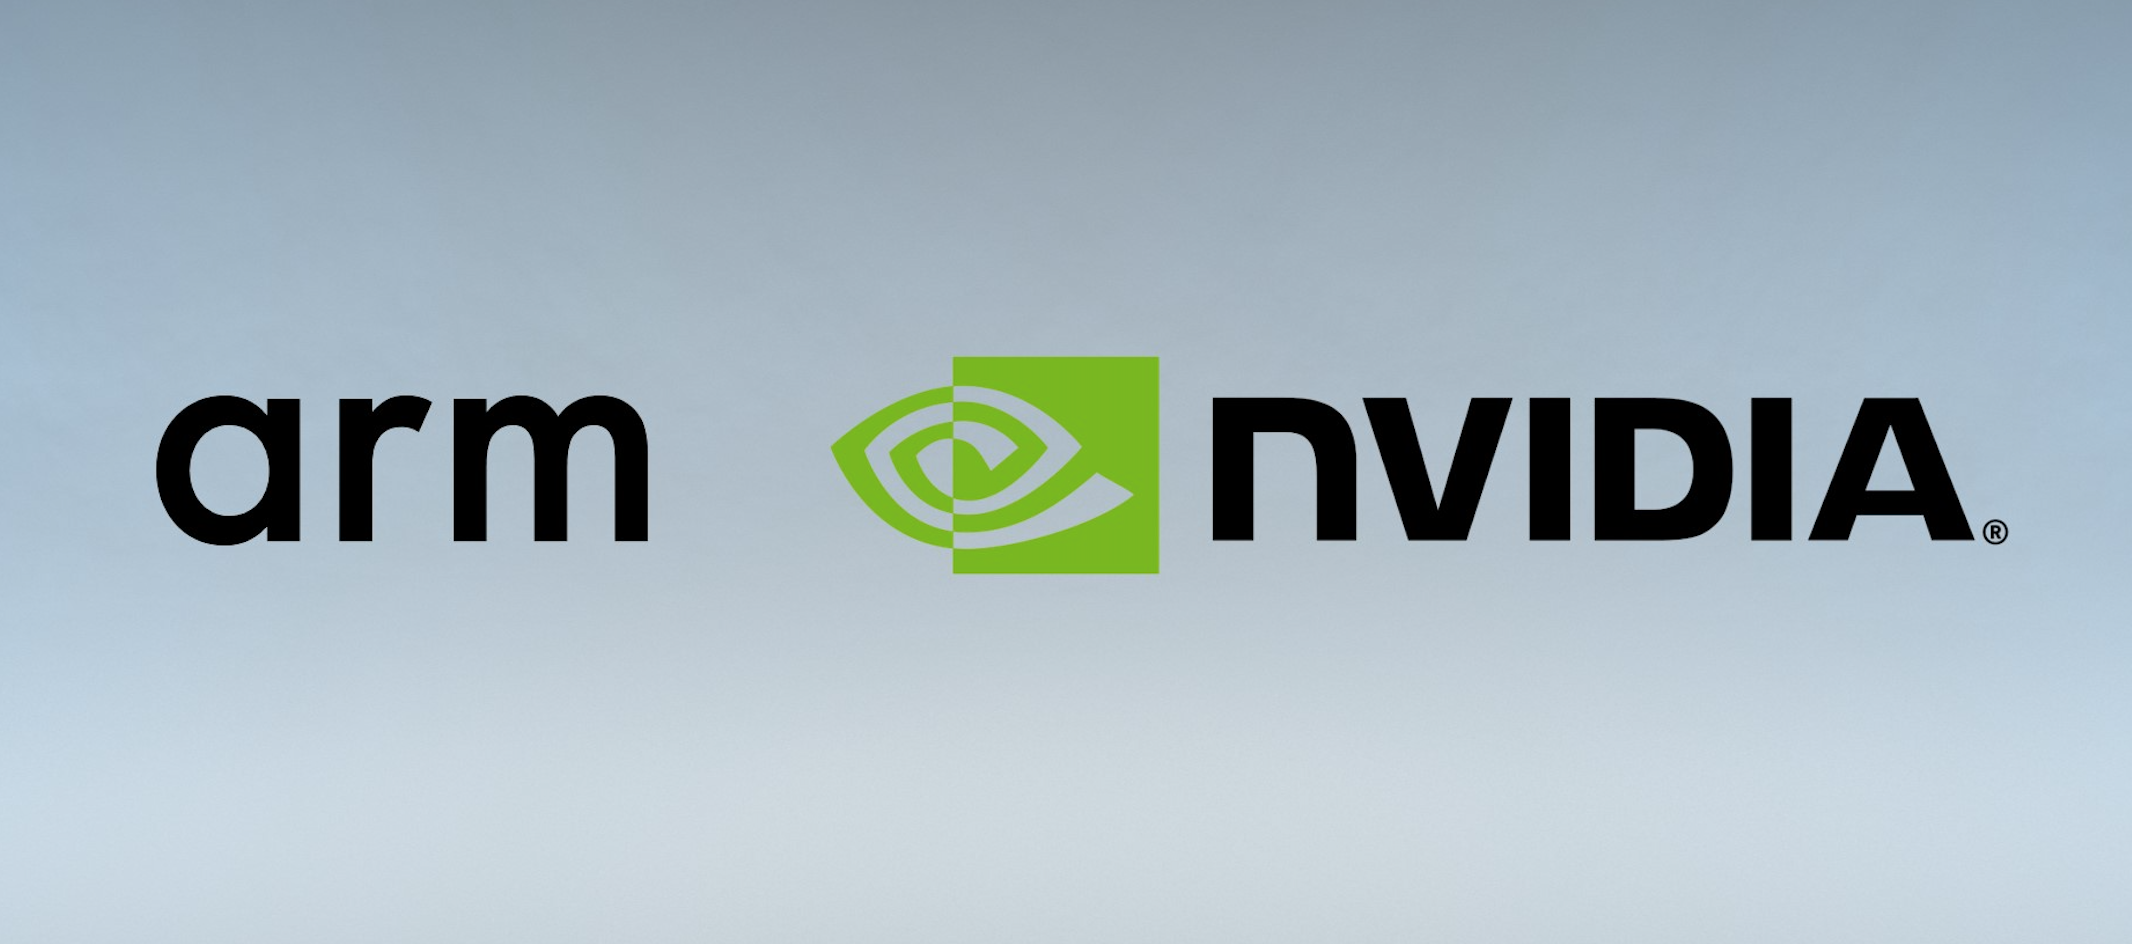 Nvidia plans to acquire semiconductor giant ARM for $40 billion.